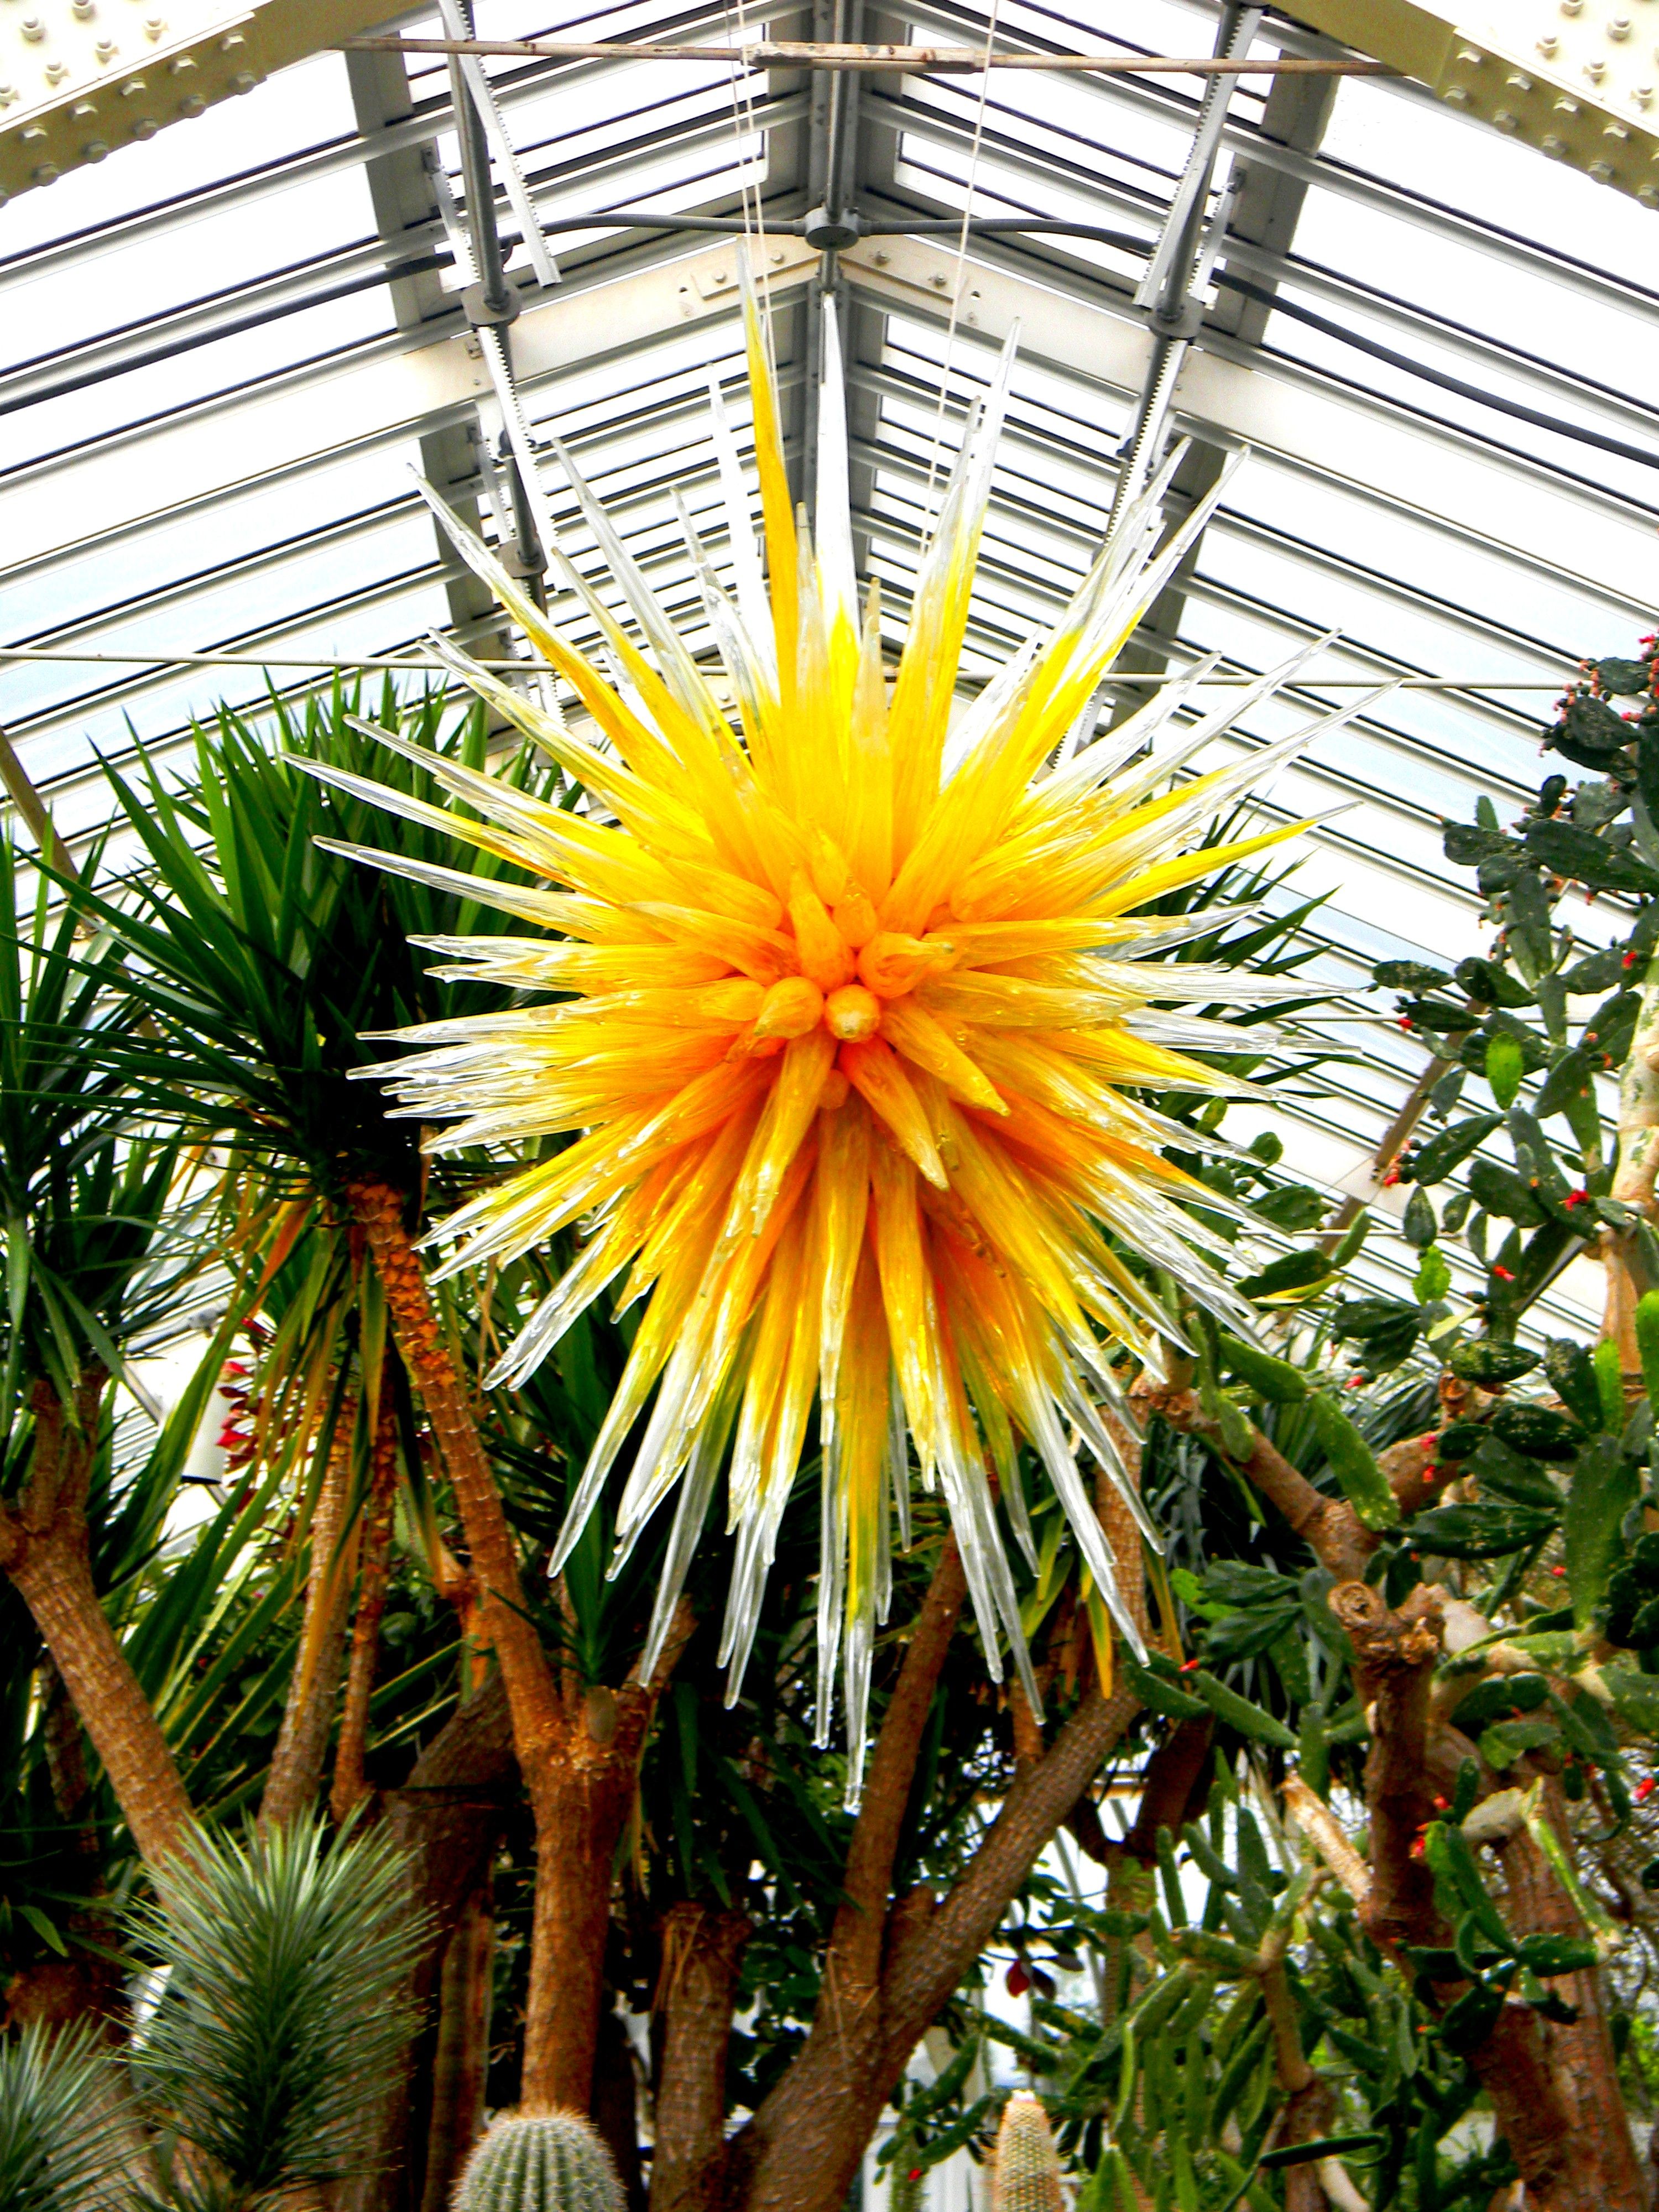 Chihuly At The Phipps In Pittsburgh Taken By John Skrabalak